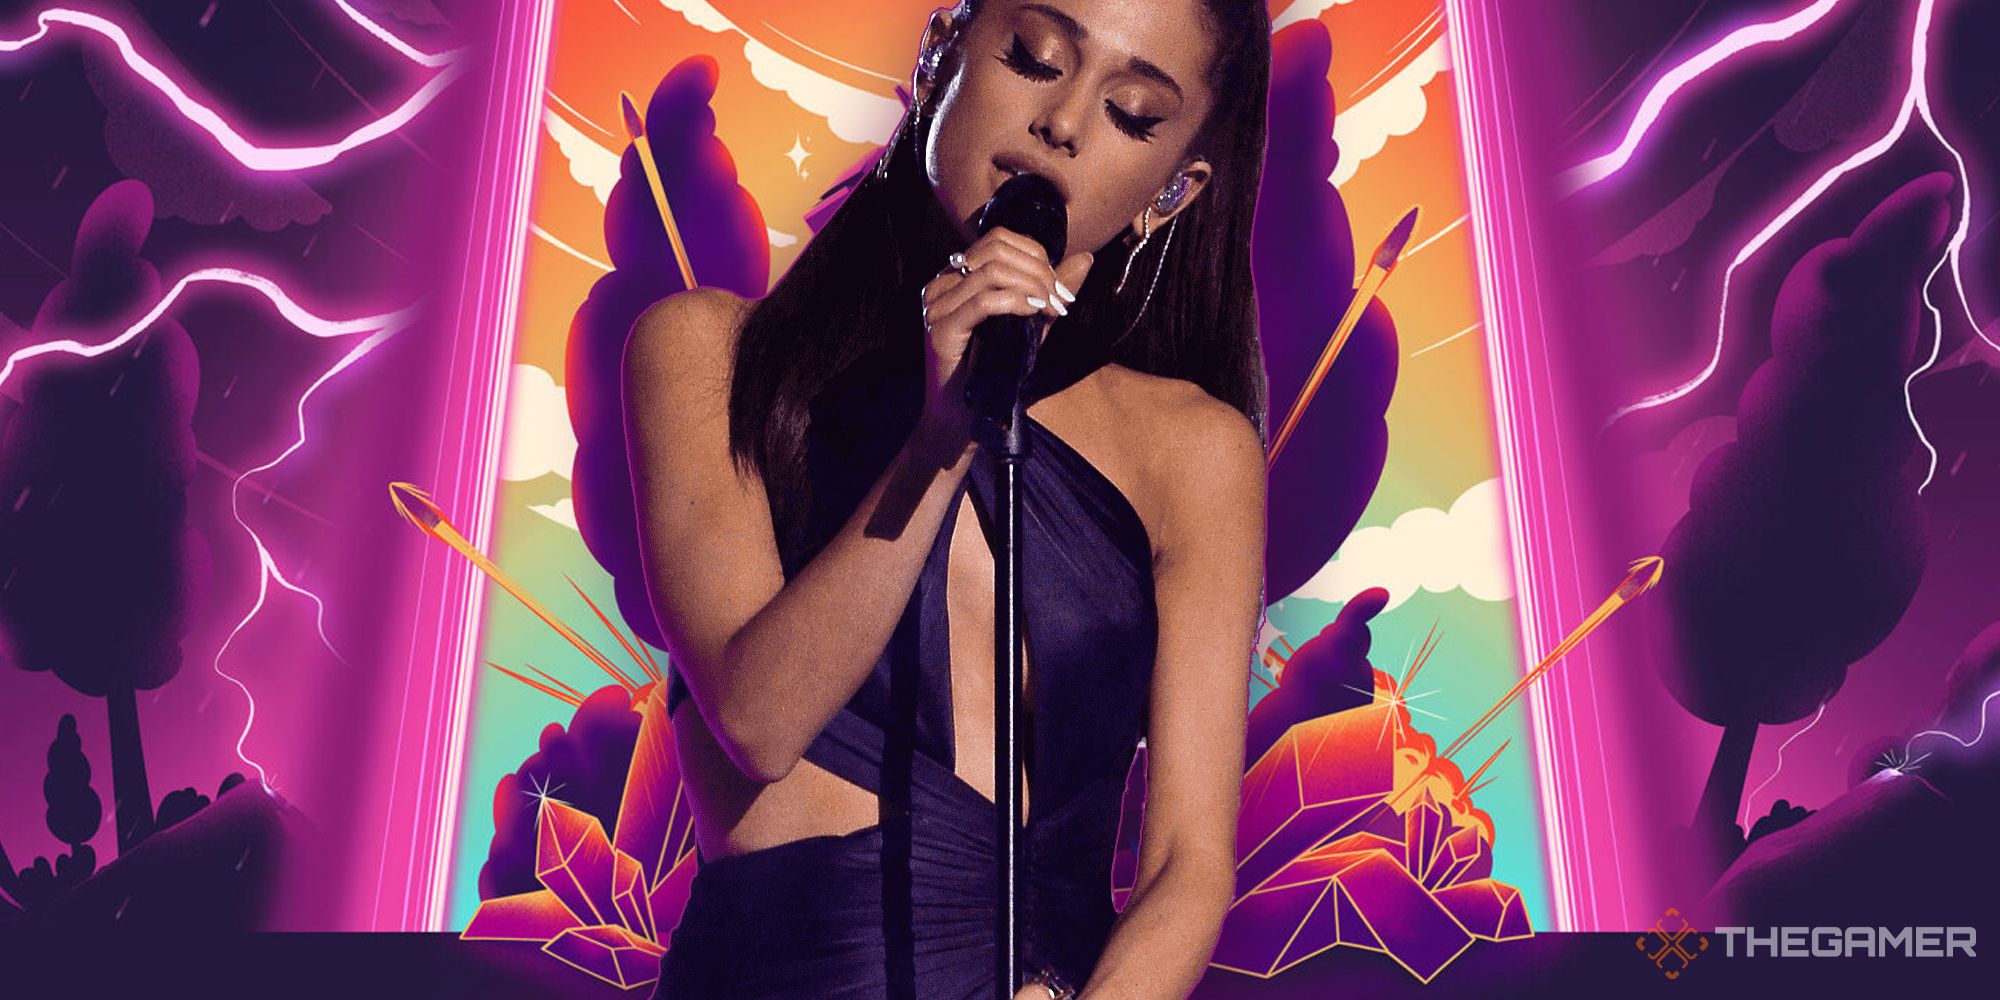 Ariana Grandes $20 Million Projected Earnings Make Fortnite The New Super Bowl HalfTime Show